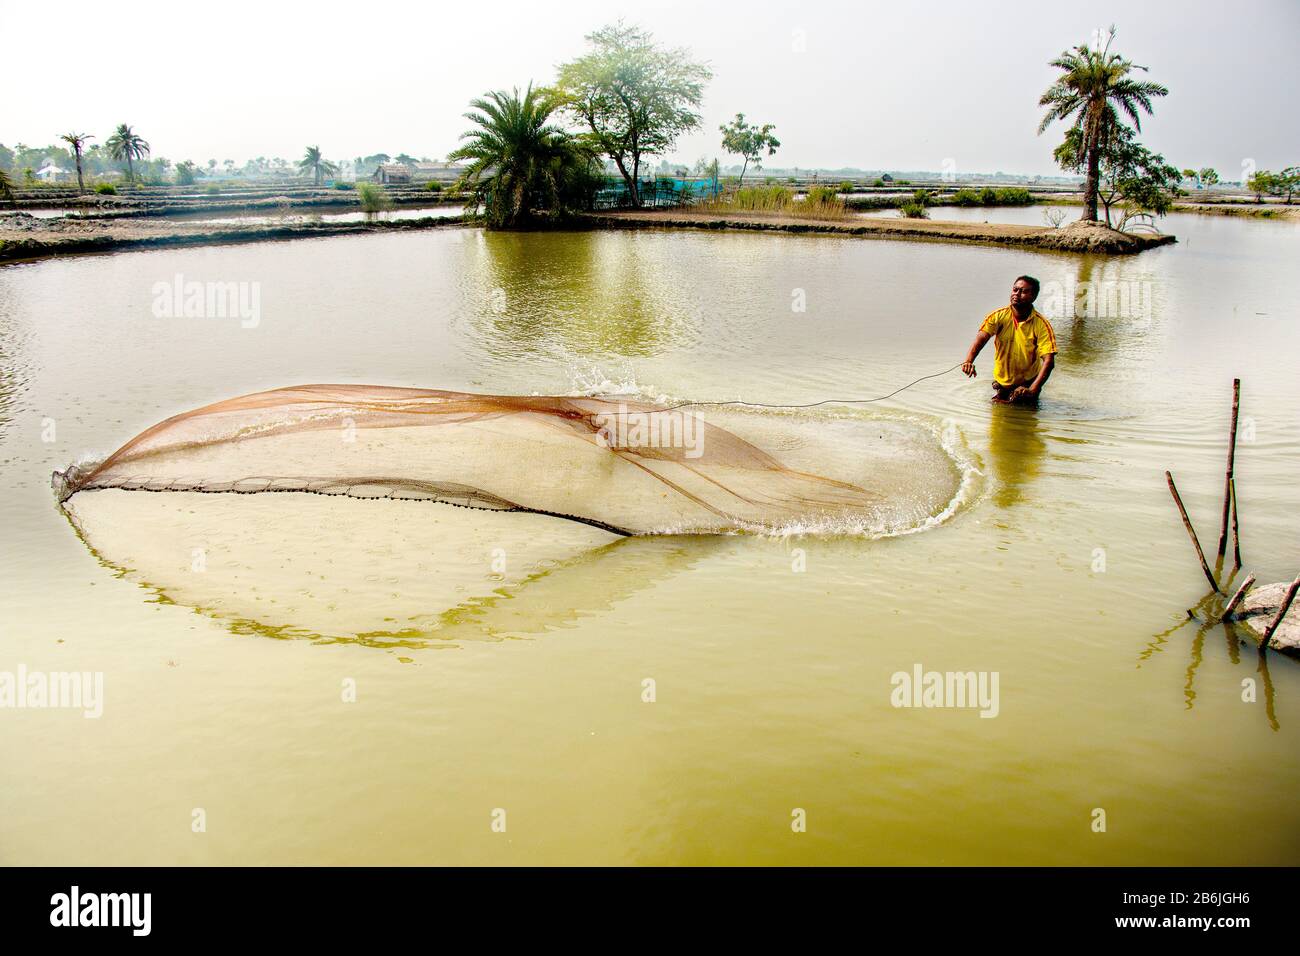 A man is catching fish from his pond with cast net. Fish plays an important role in food and nutrition security and fighting climate change. Stock Photo